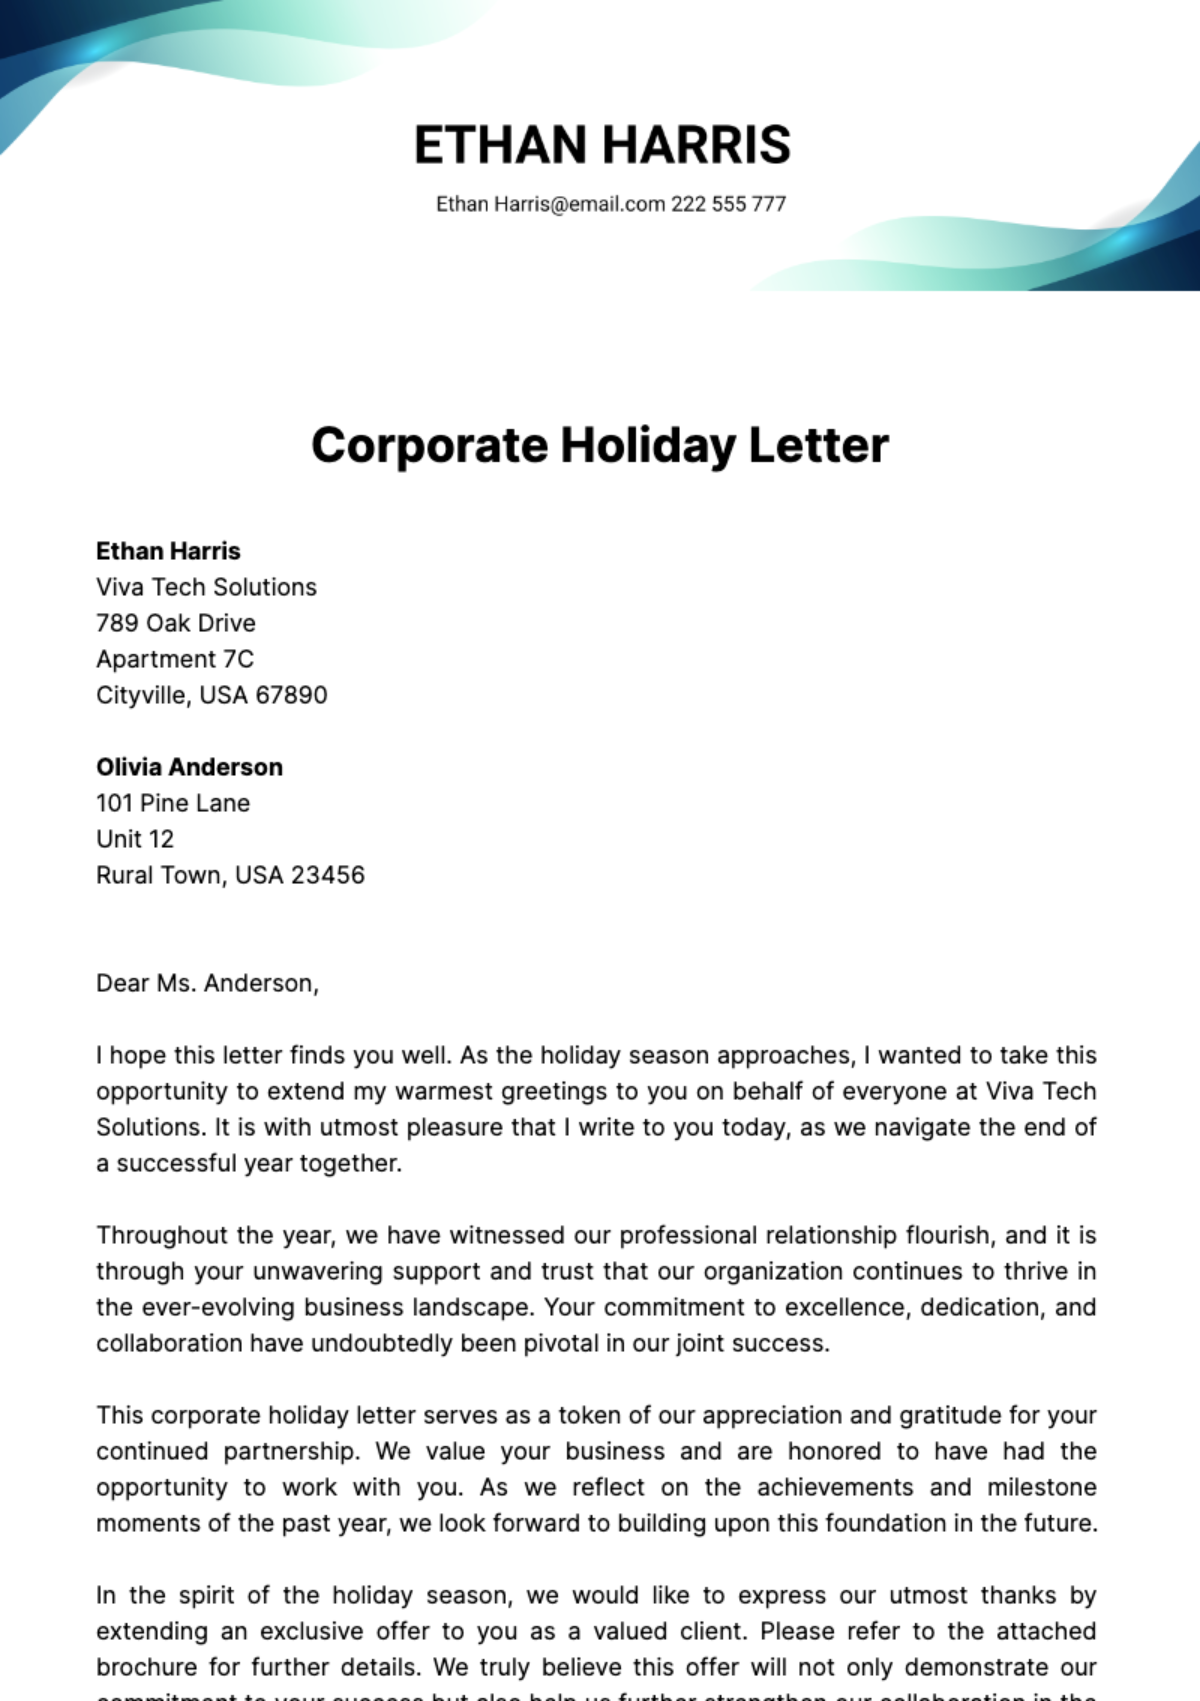 Free Corporate Holiday Letter Template